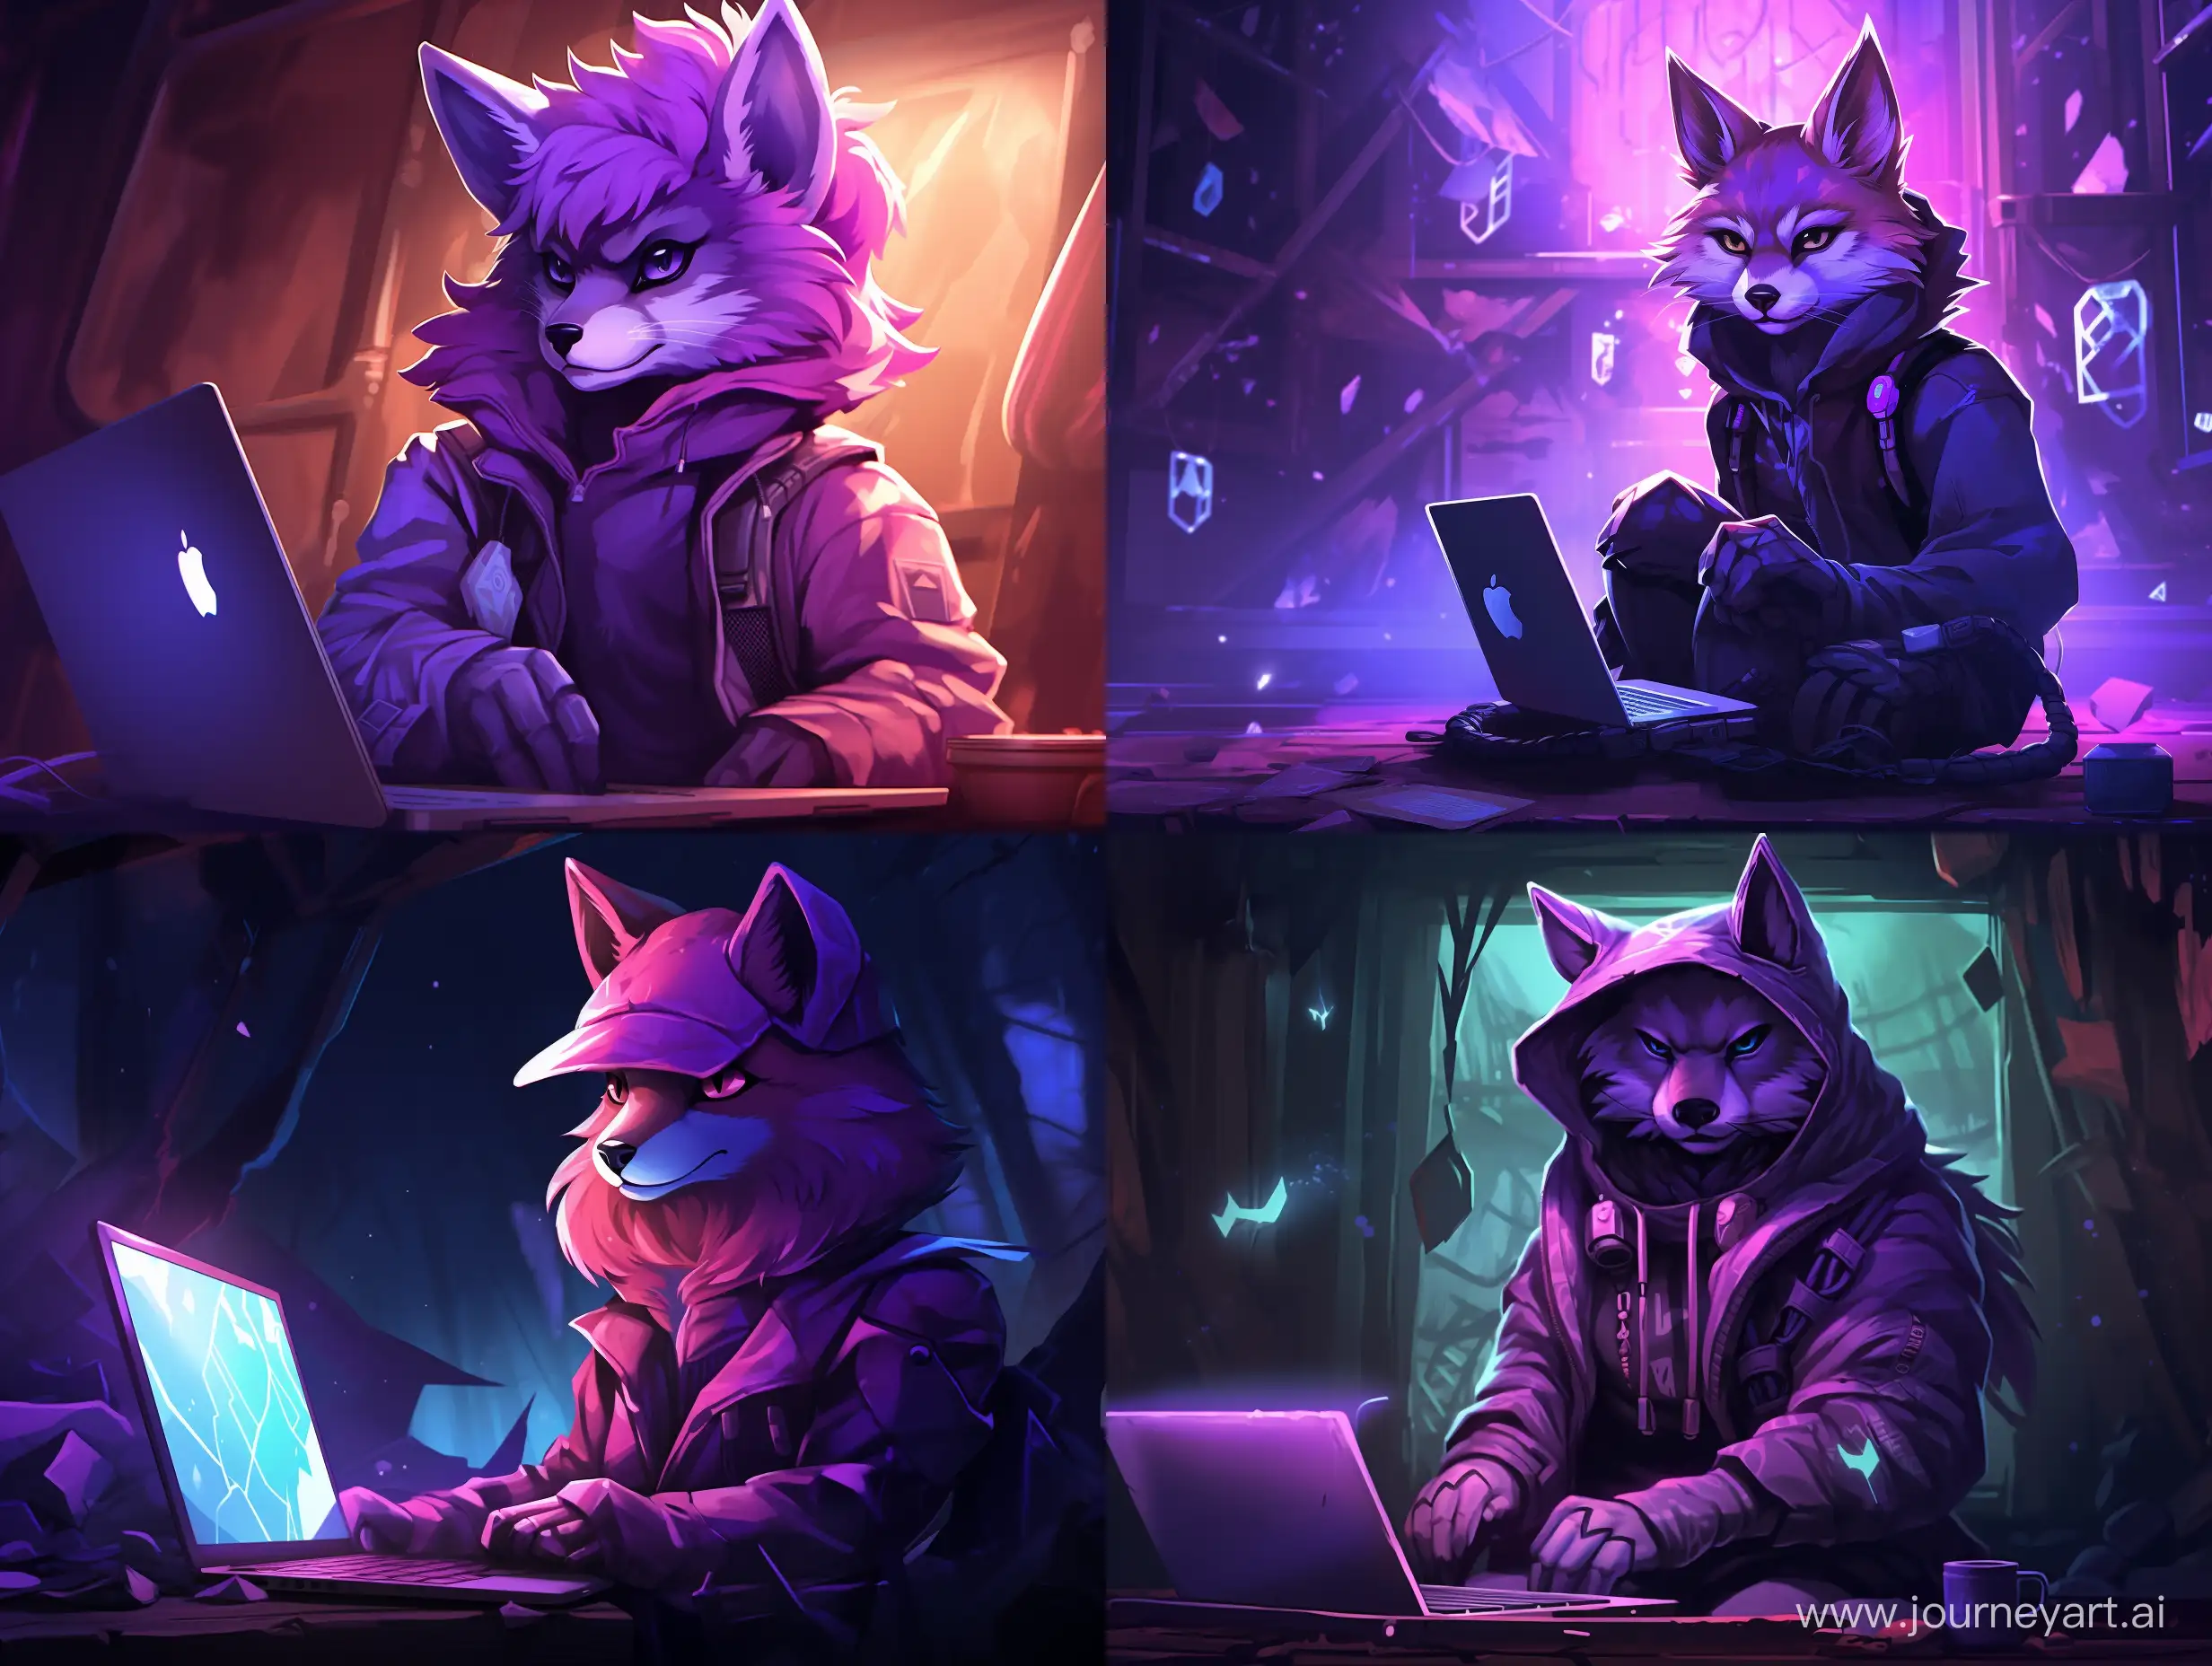 Cyber-Fox-Engaged-in-VK-Gaming-on-Violet-Background